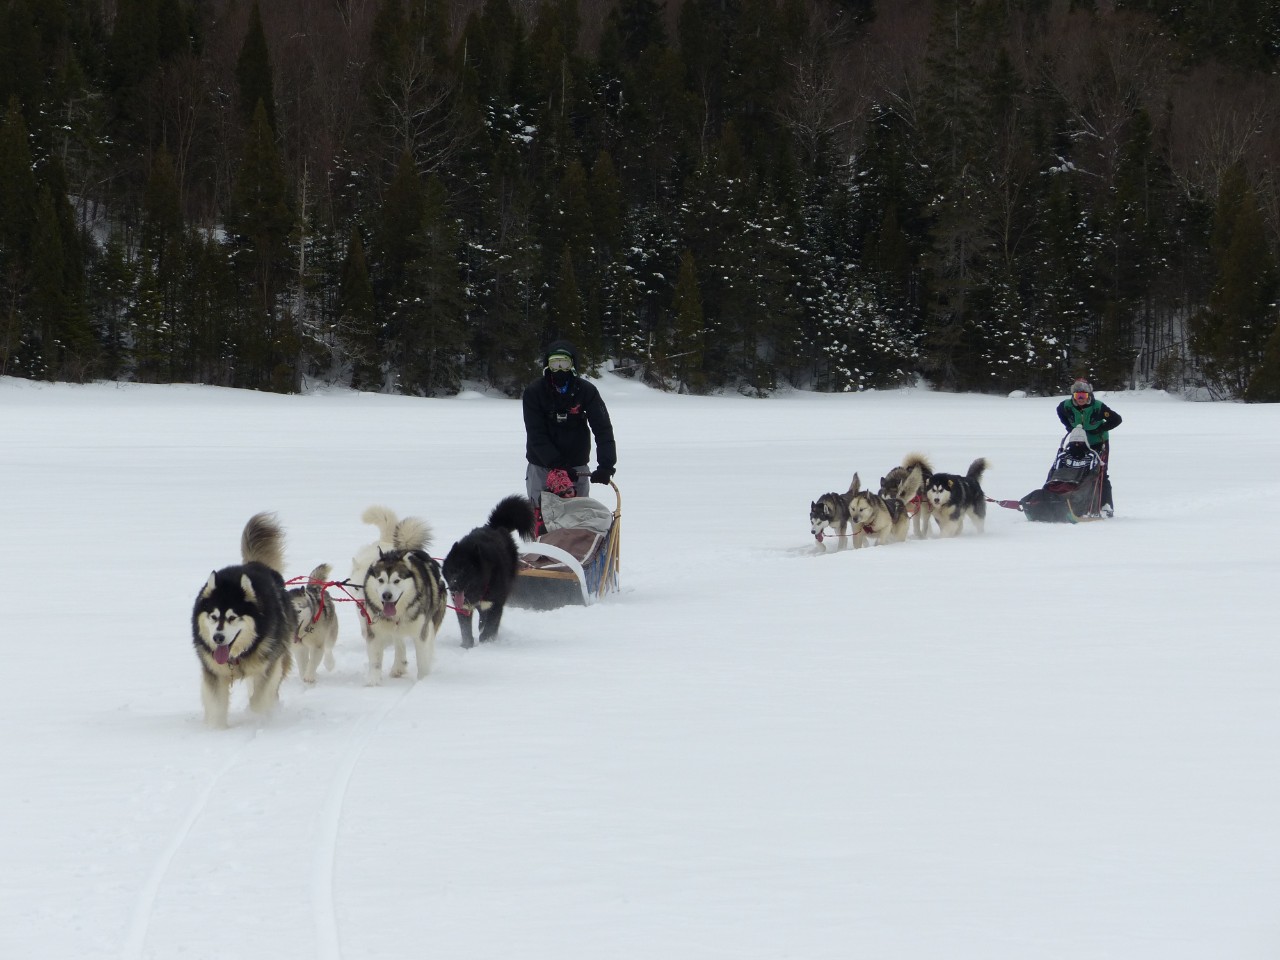 Two persons on two sleds pulled by dogs in the snow.